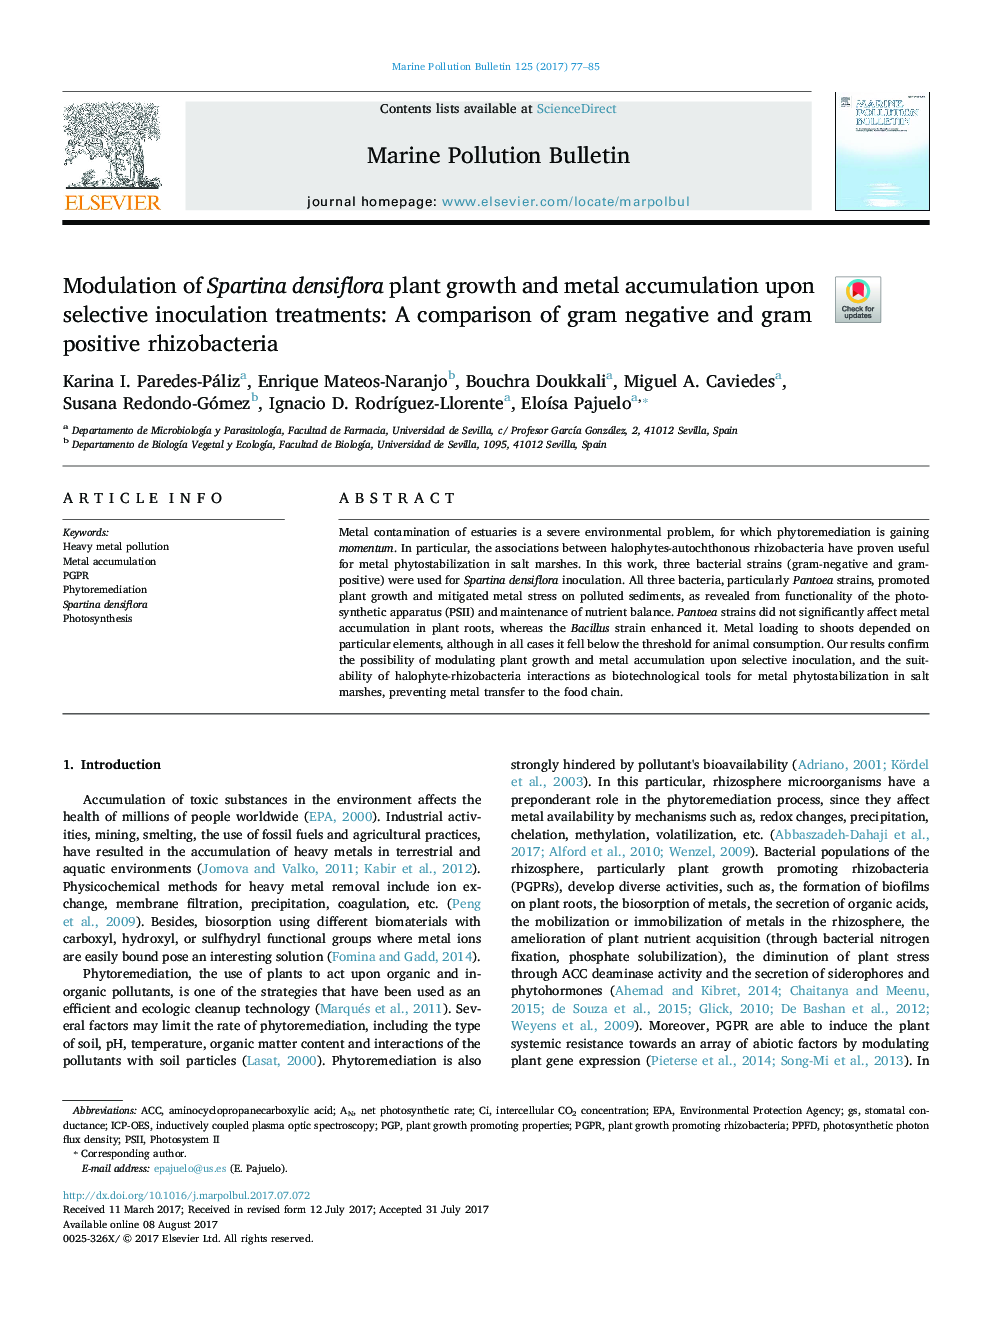 Modulation of Spartina densiflora plant growth and metal accumulation upon selective inoculation treatments: A comparison of gram negative and gram positive rhizobacteria